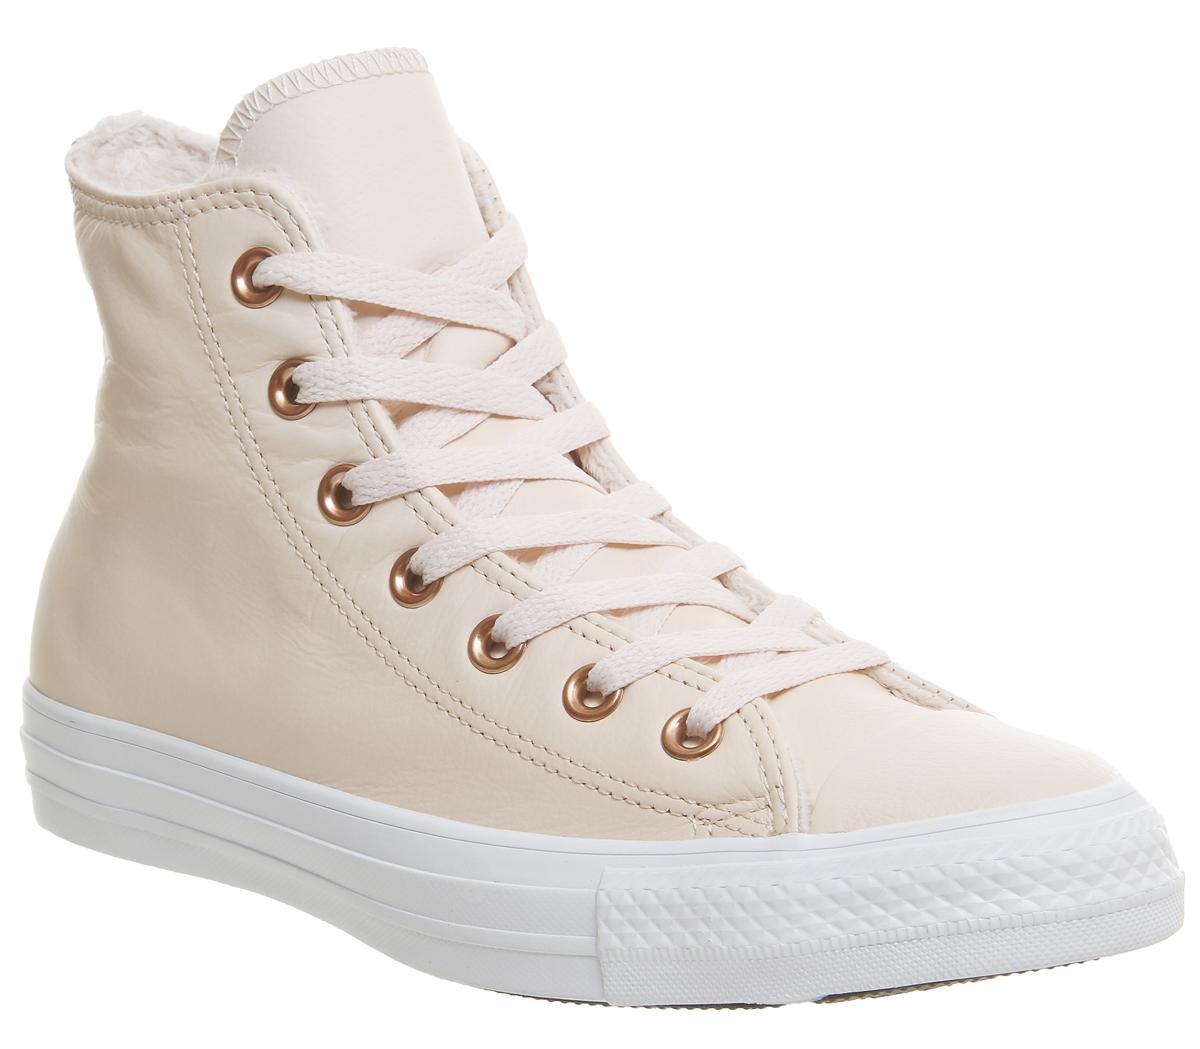 Converse All Star Hi Leather Pastel 